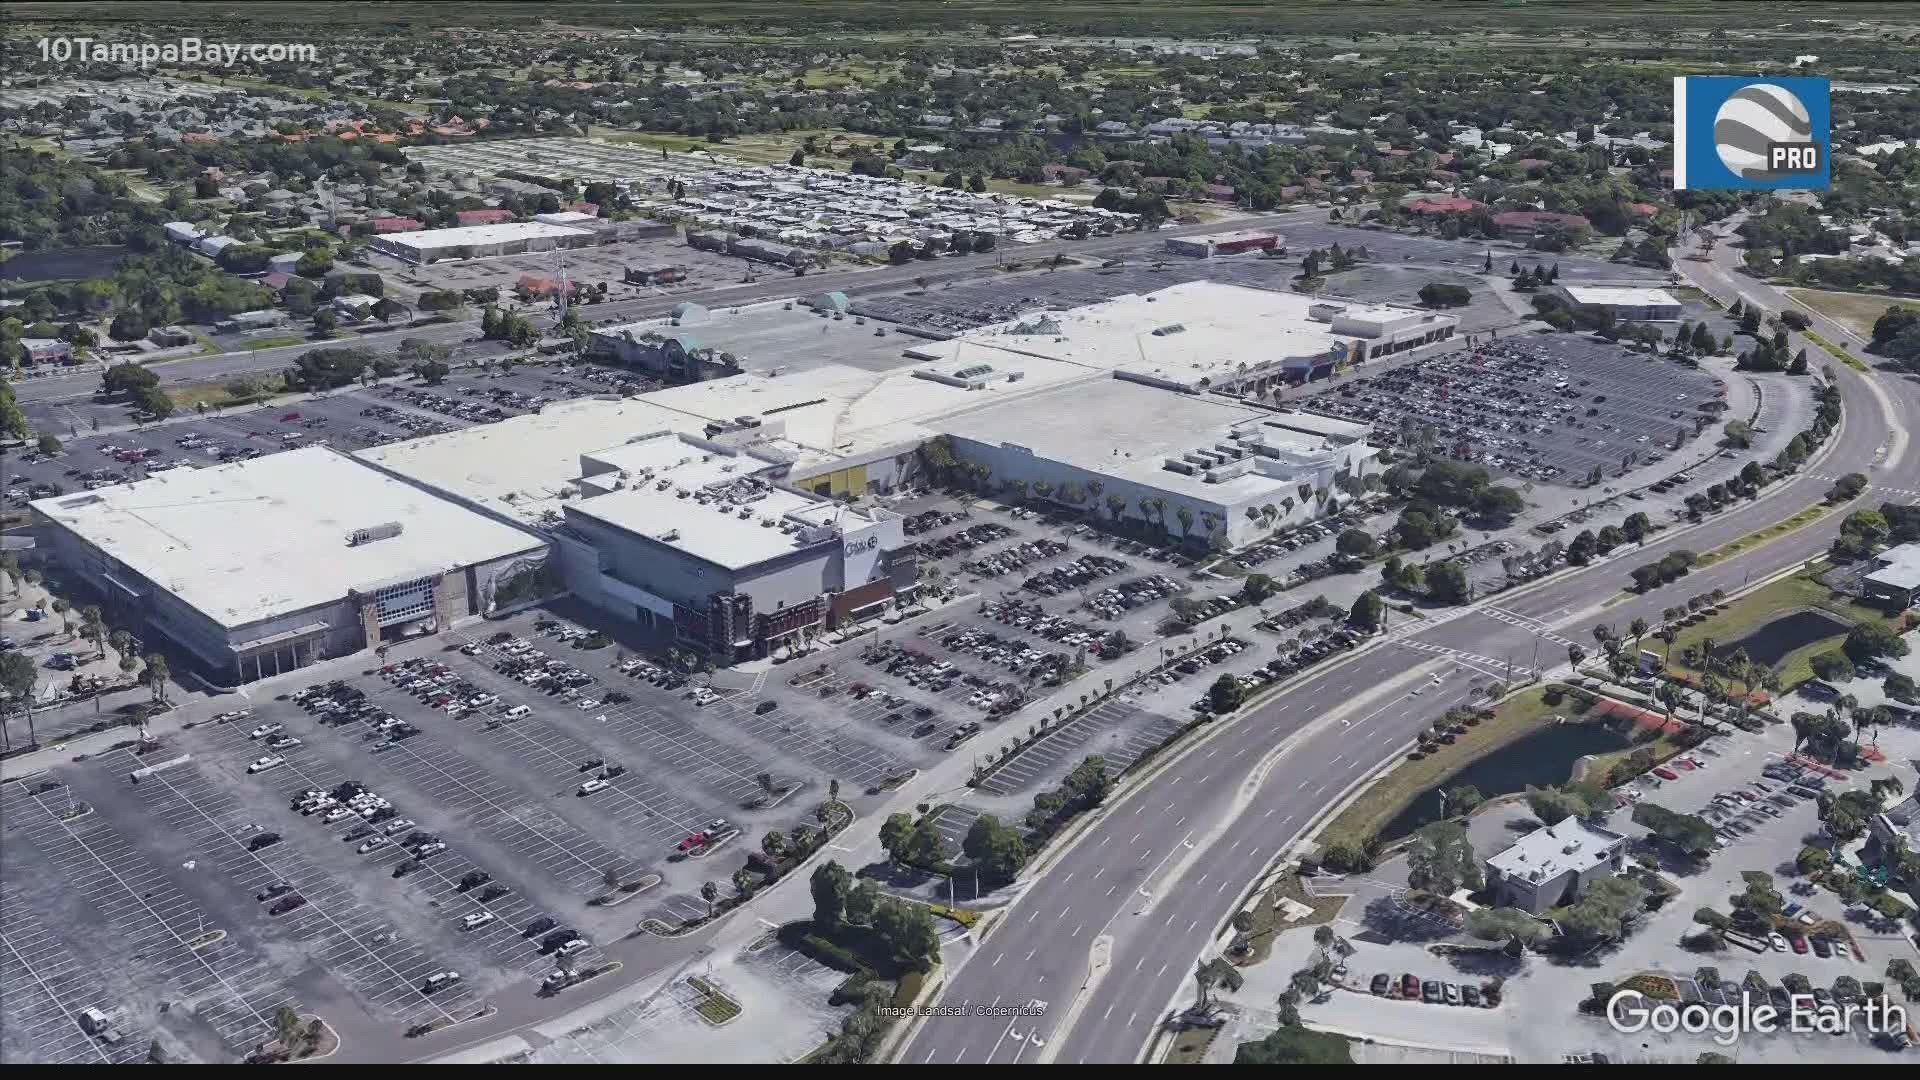 Citrus Park and Countryside malls are in default but should remain open.